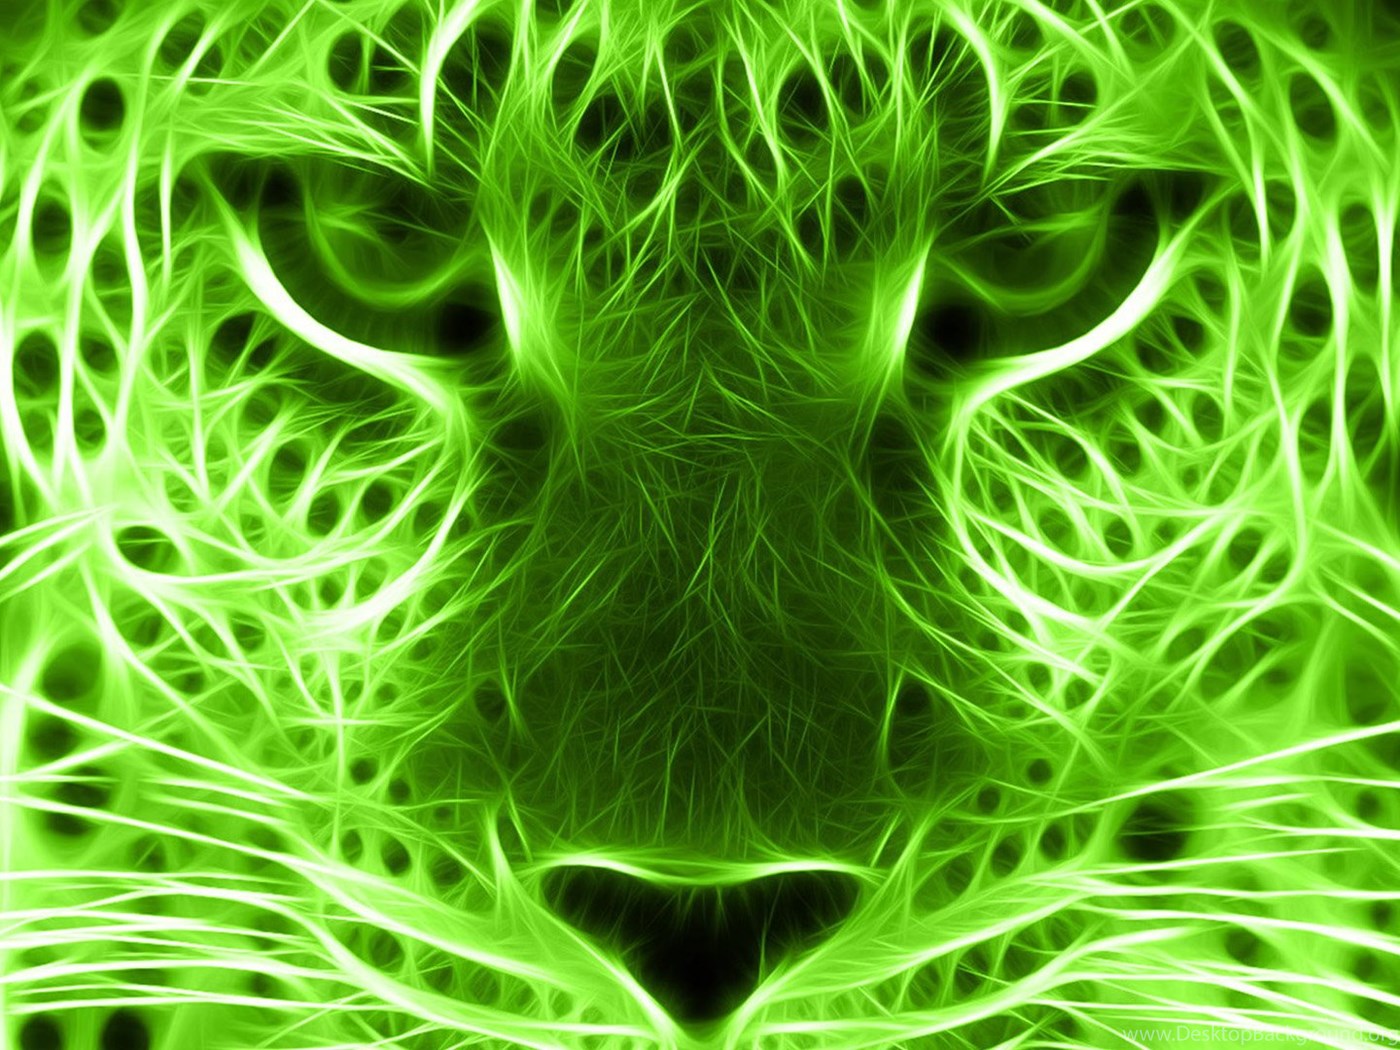 Green 3D Leopard Wallpaper, Green Backgrounds, Pictures And Images